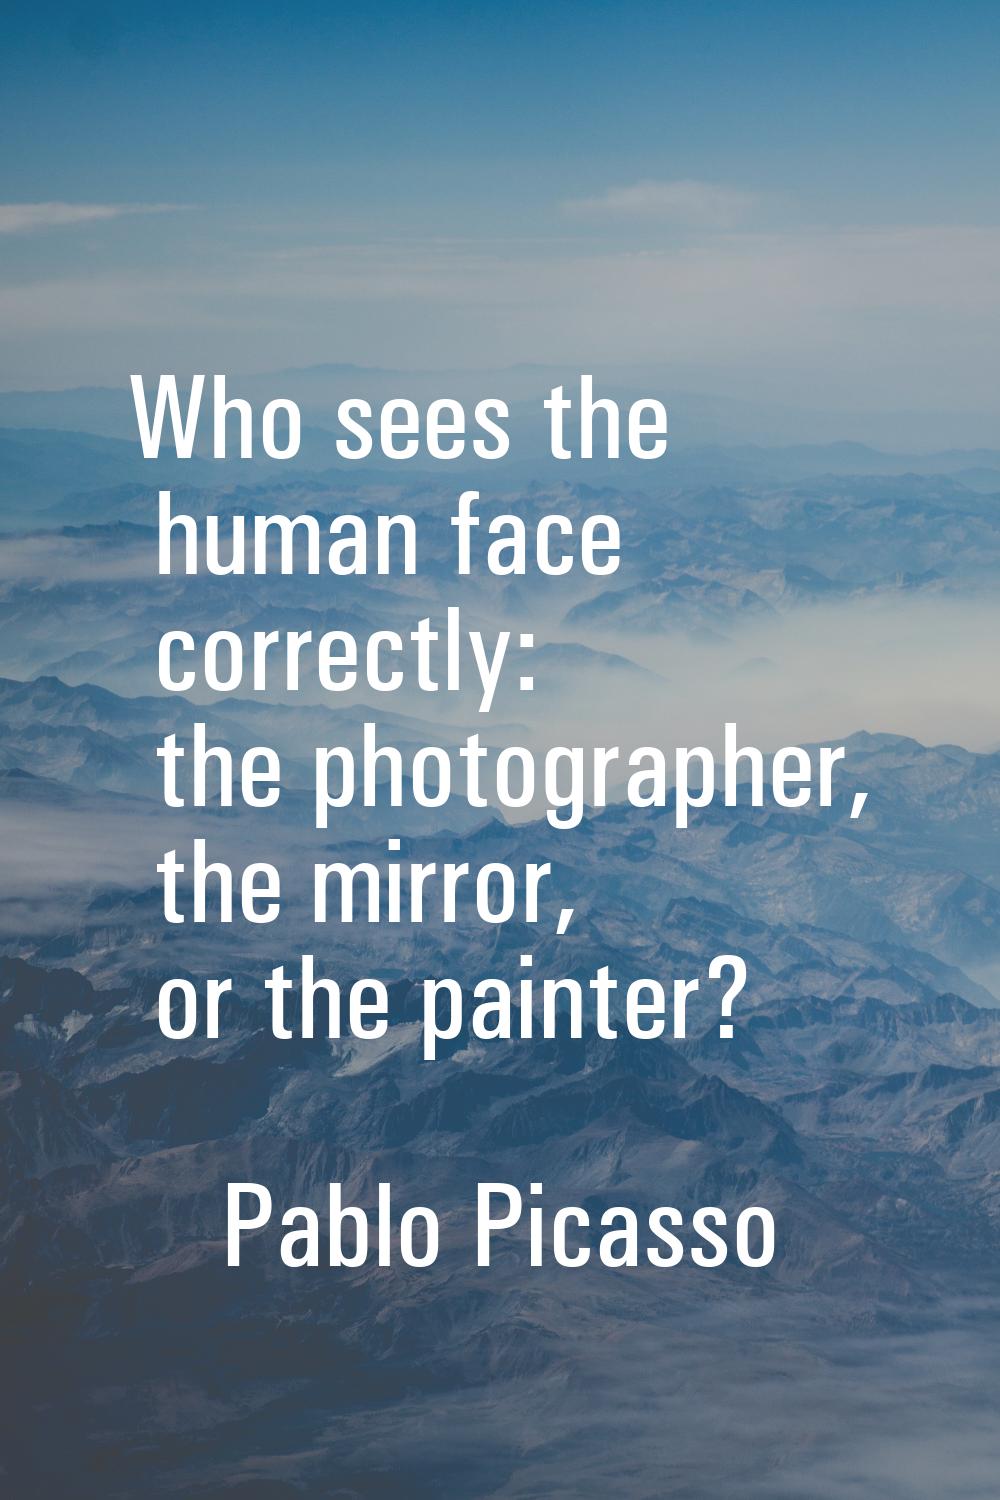 Who sees the human face correctly: the photographer, the mirror, or the painter?